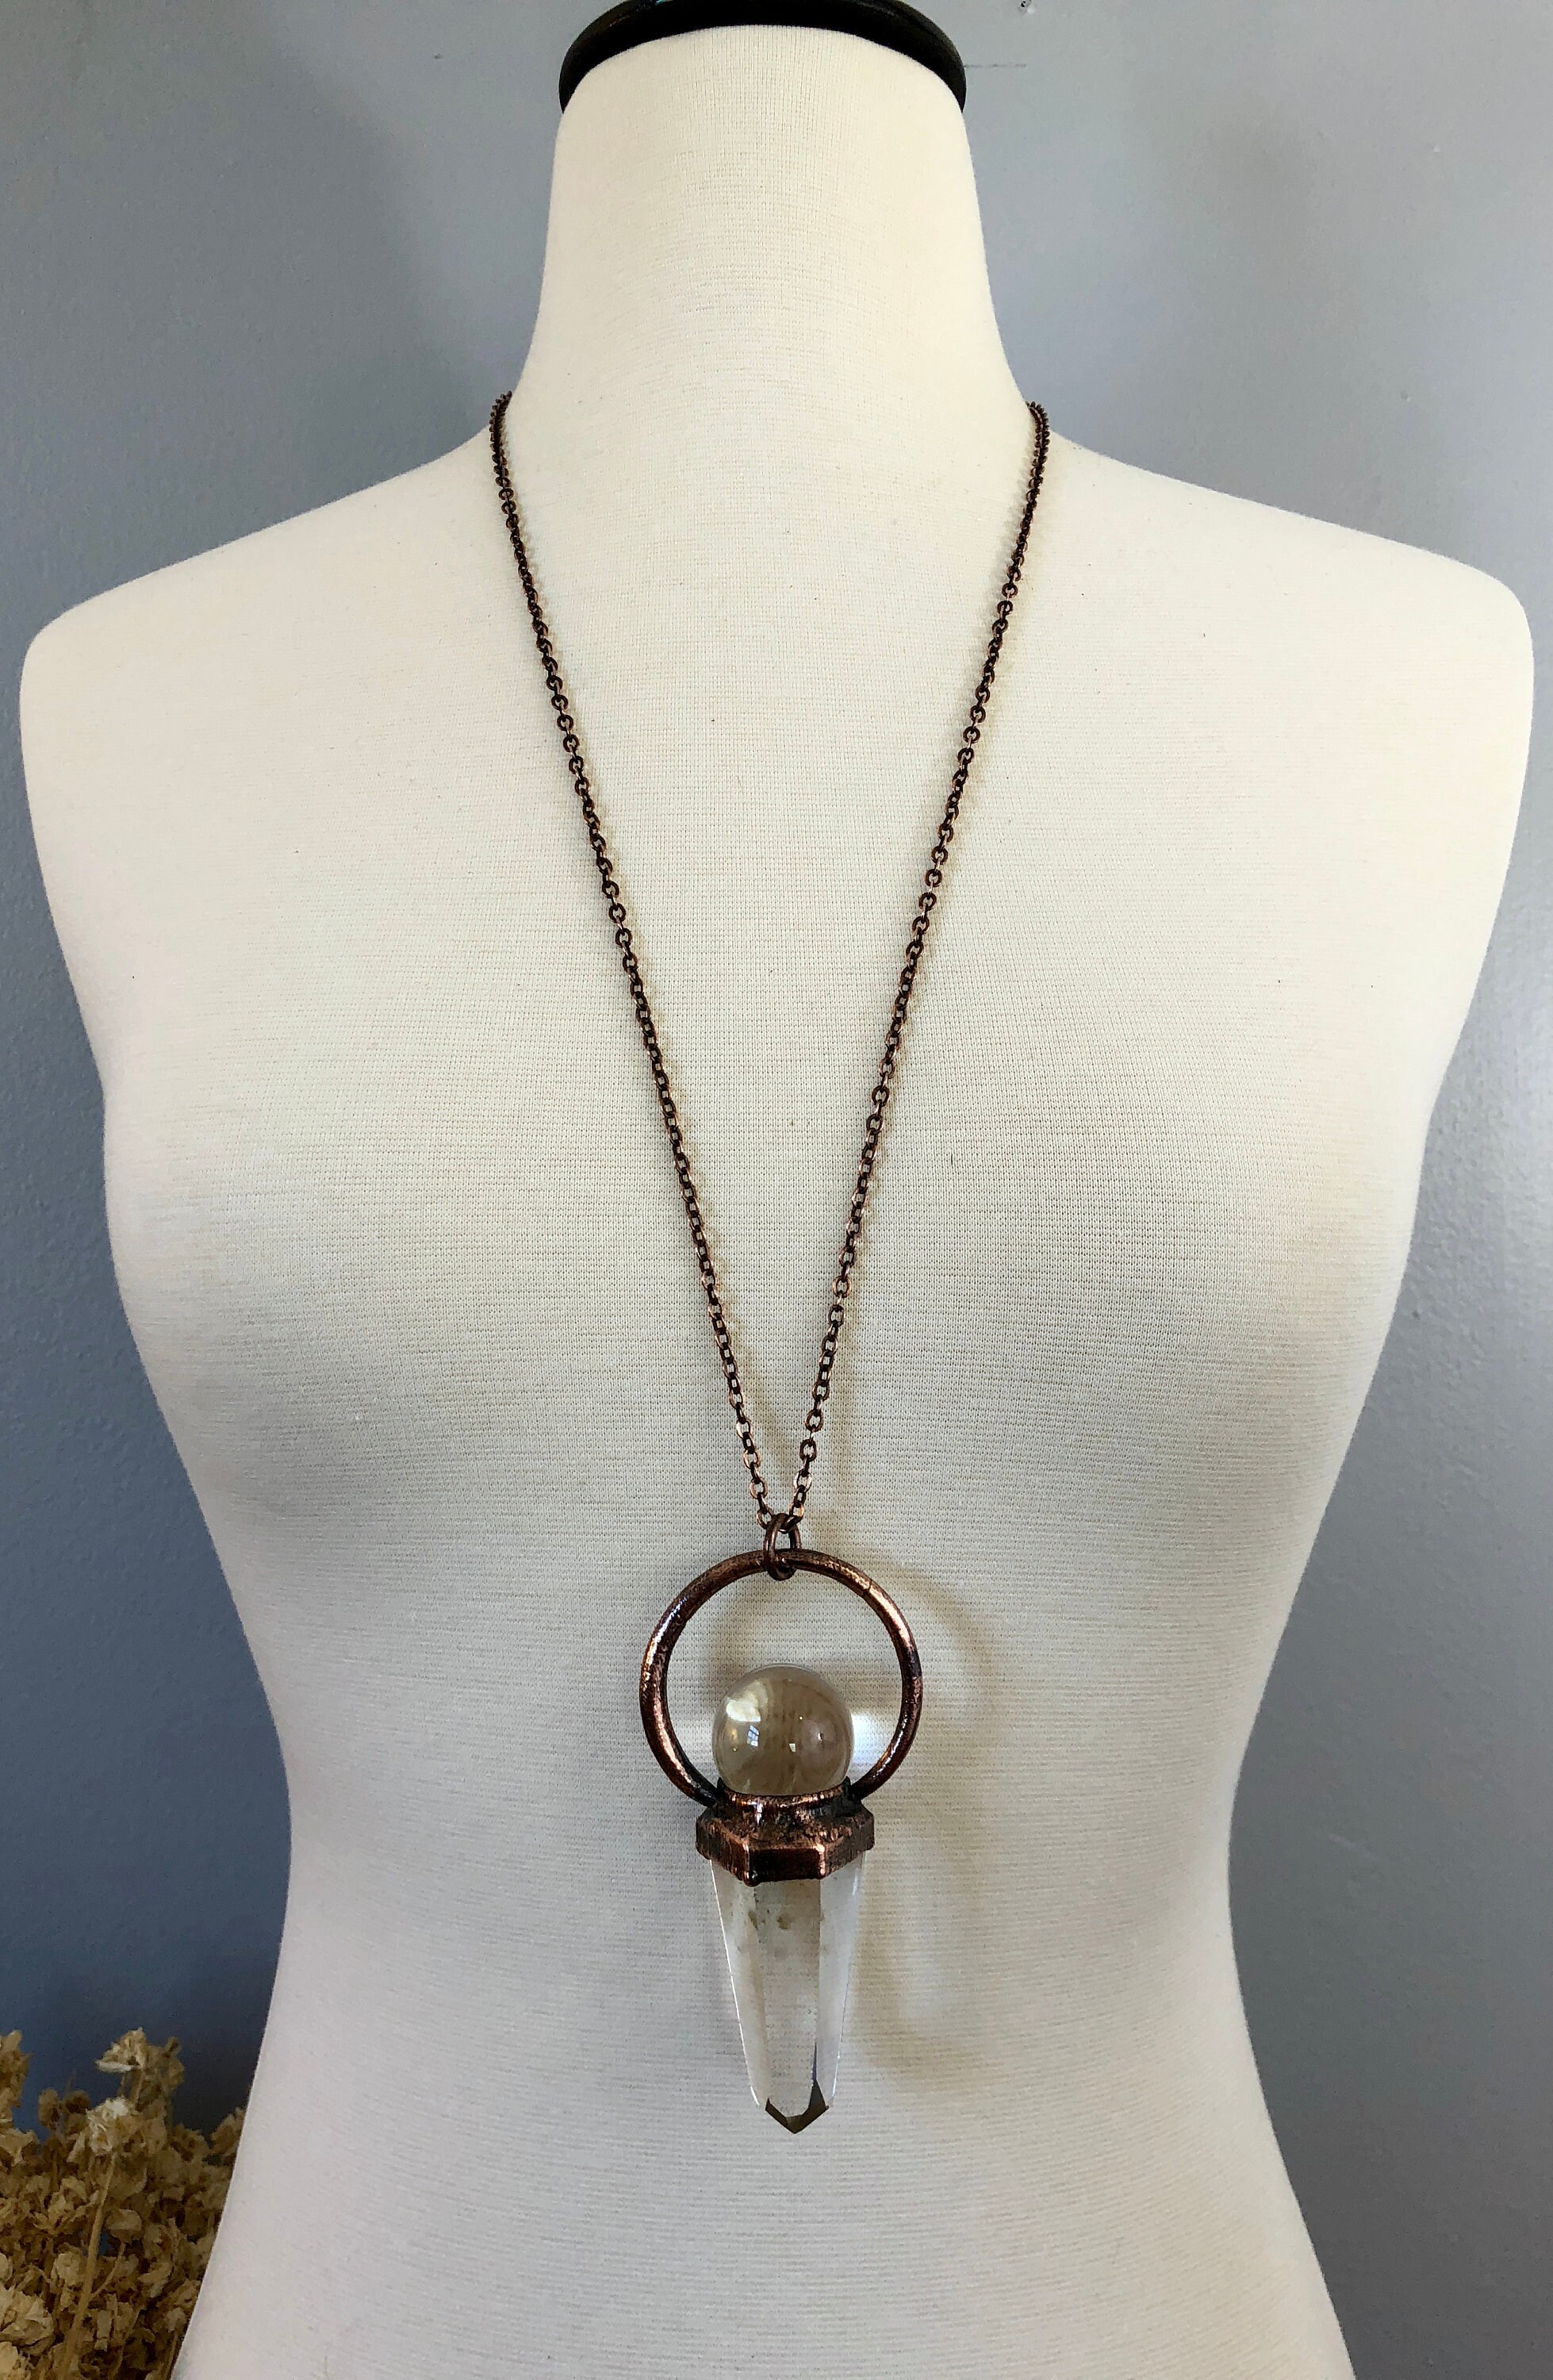 Crystal Ball Necklace Large Smoky Quartz Crystal Necklace